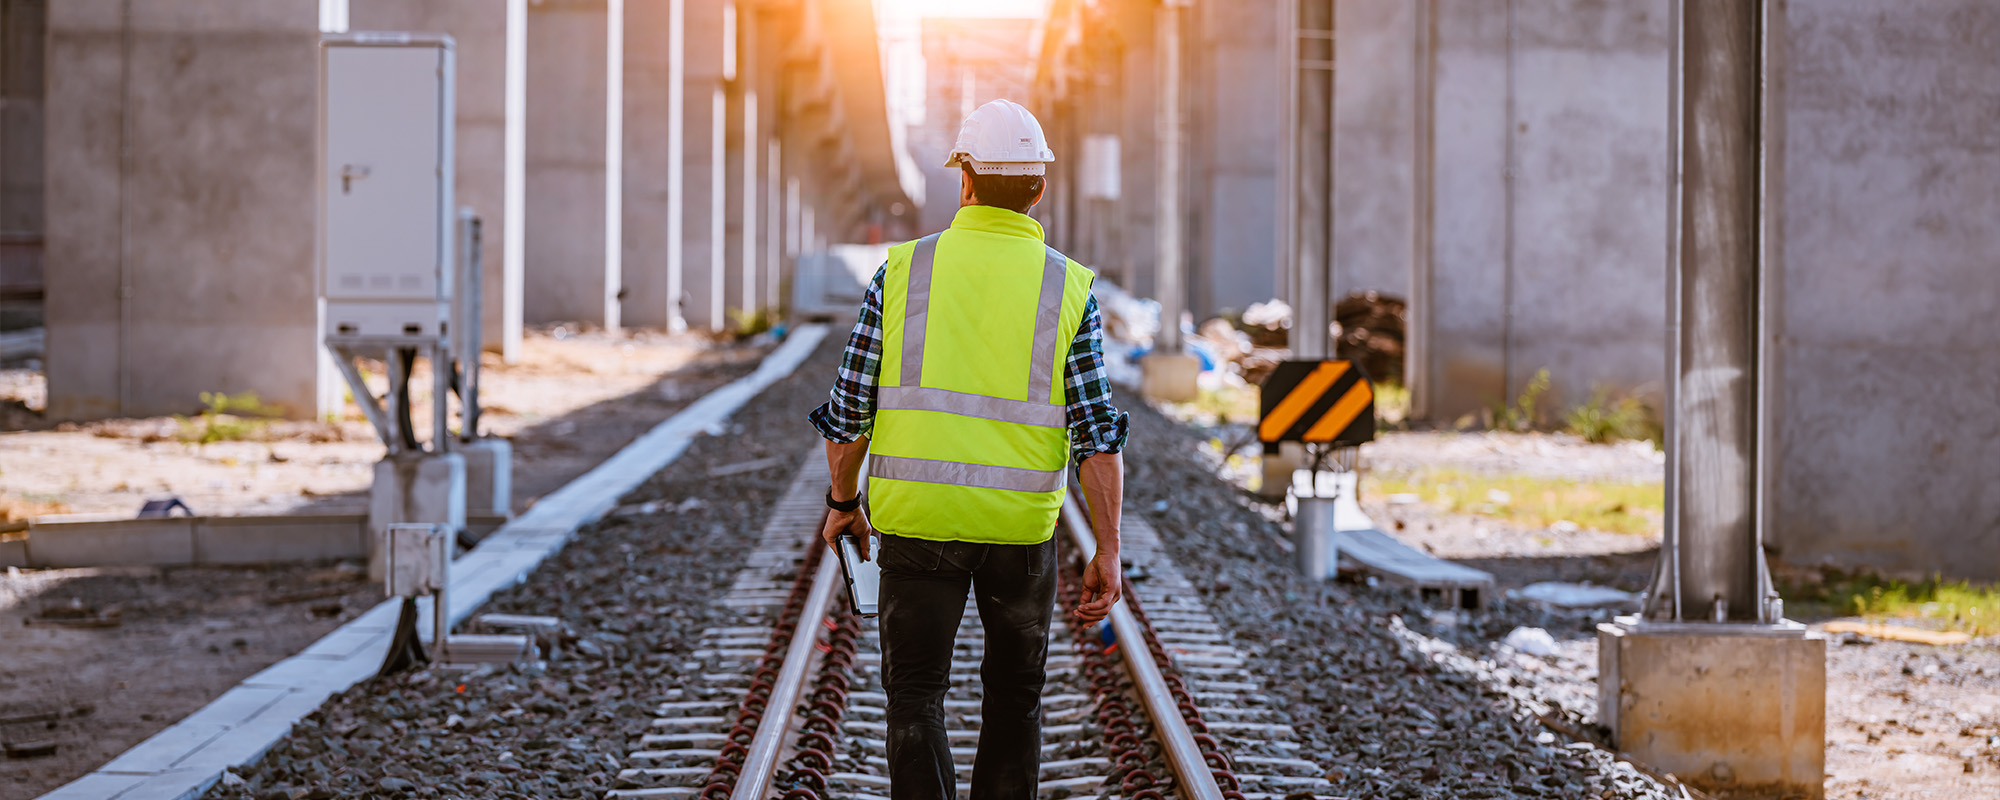 Portrait engineer under inspection and checking construction process railway and checking work on railroad station Engineer wearing safety uniform and safety helmet in work